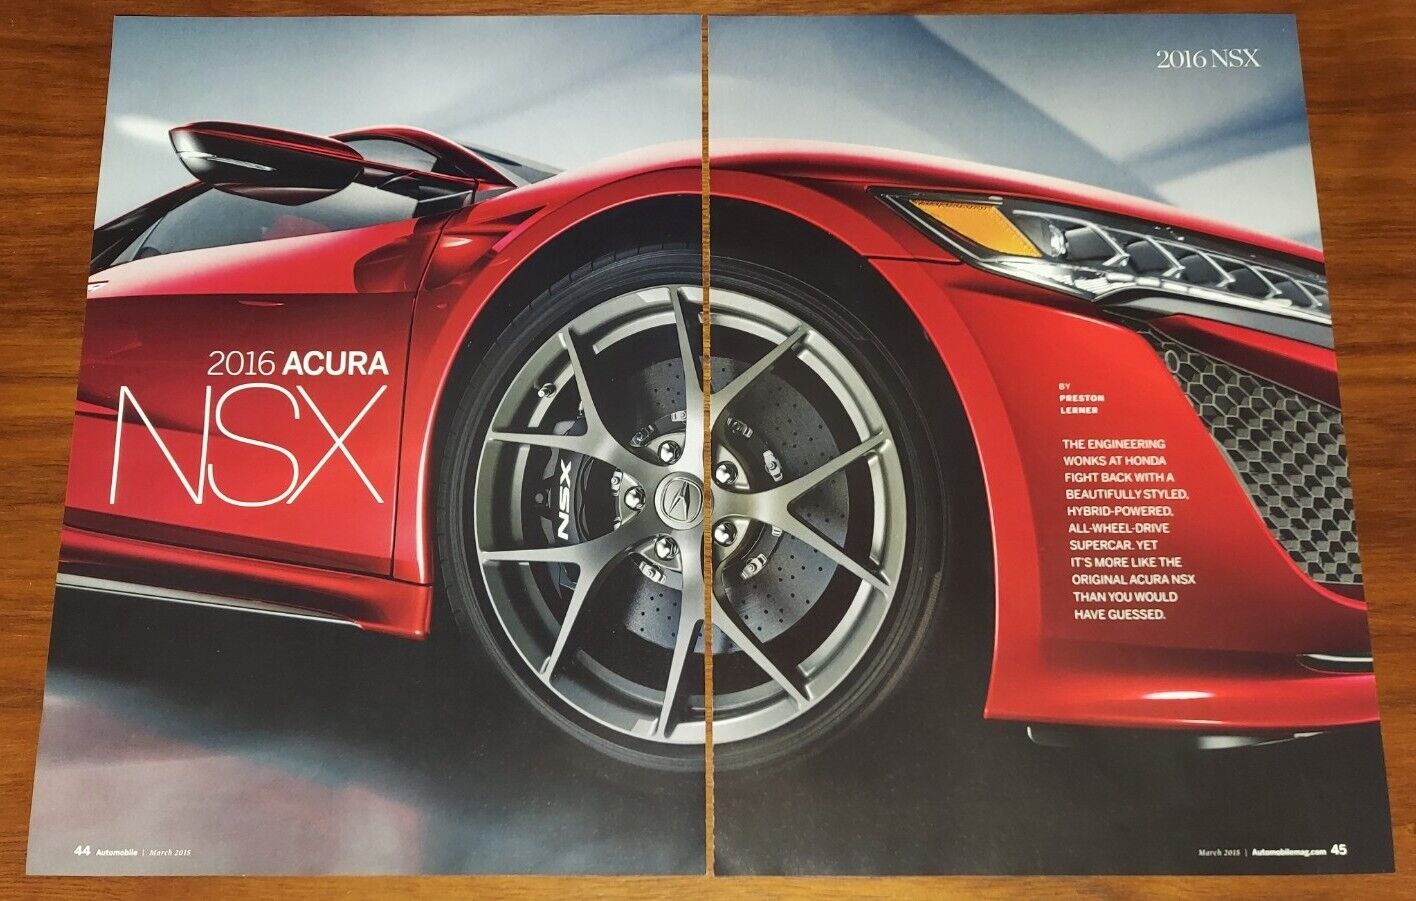 Acura 2016 Nsx Magazine Article Automobile Mag Hybrid-powered All-wheel-drive